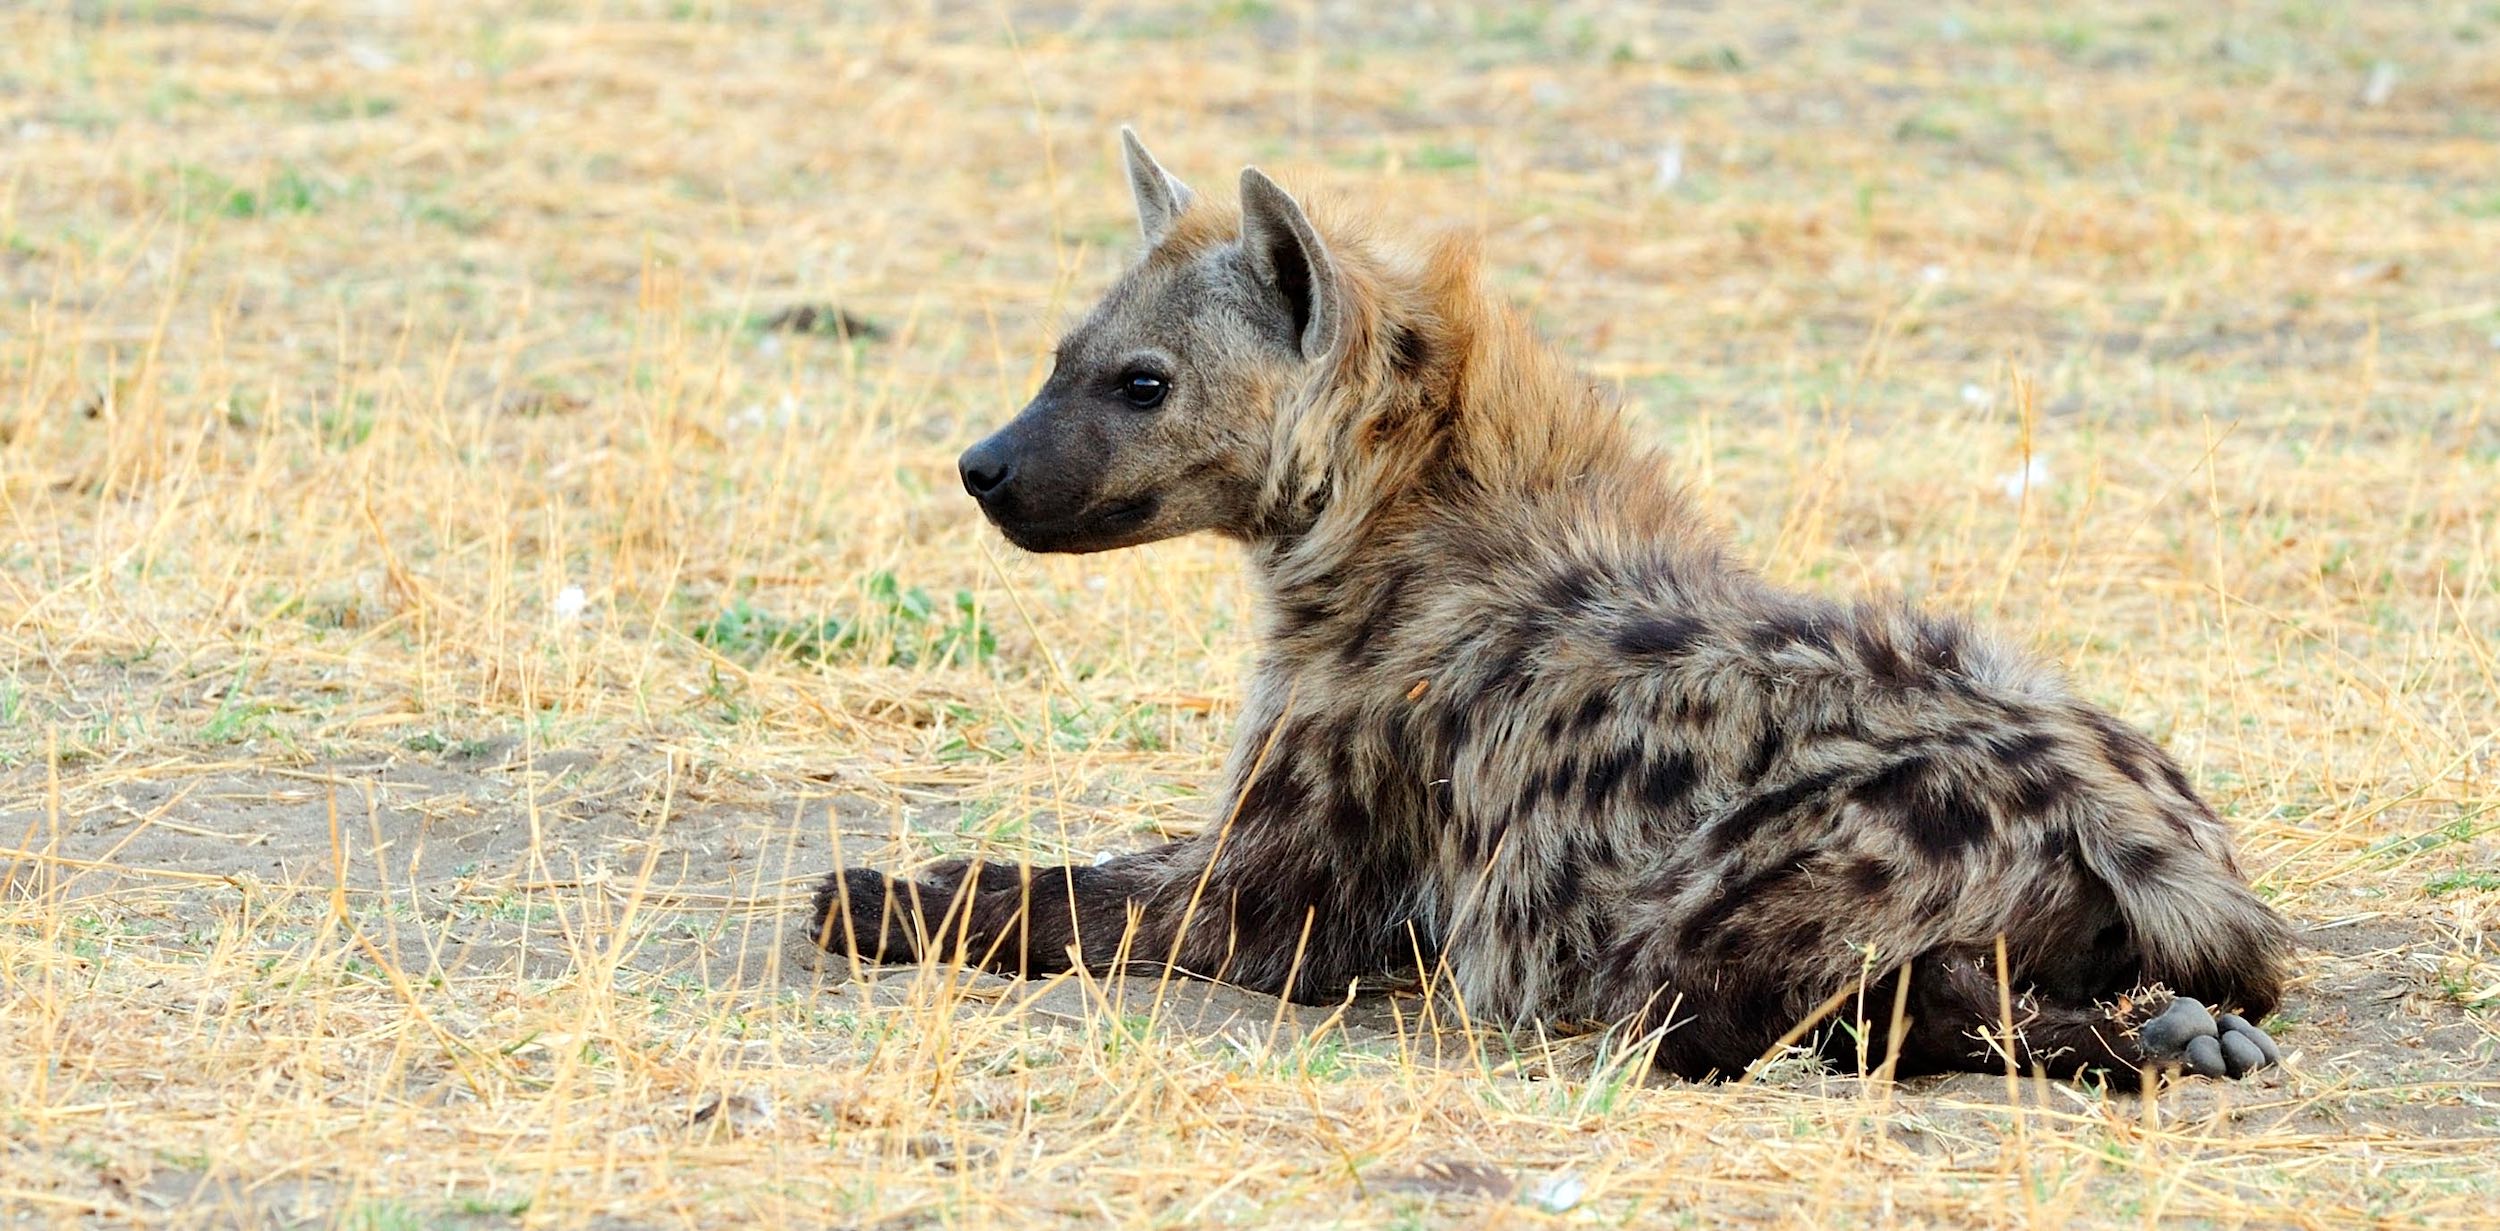 A spotted hyaena sitting on the ground and looking very peaceful.